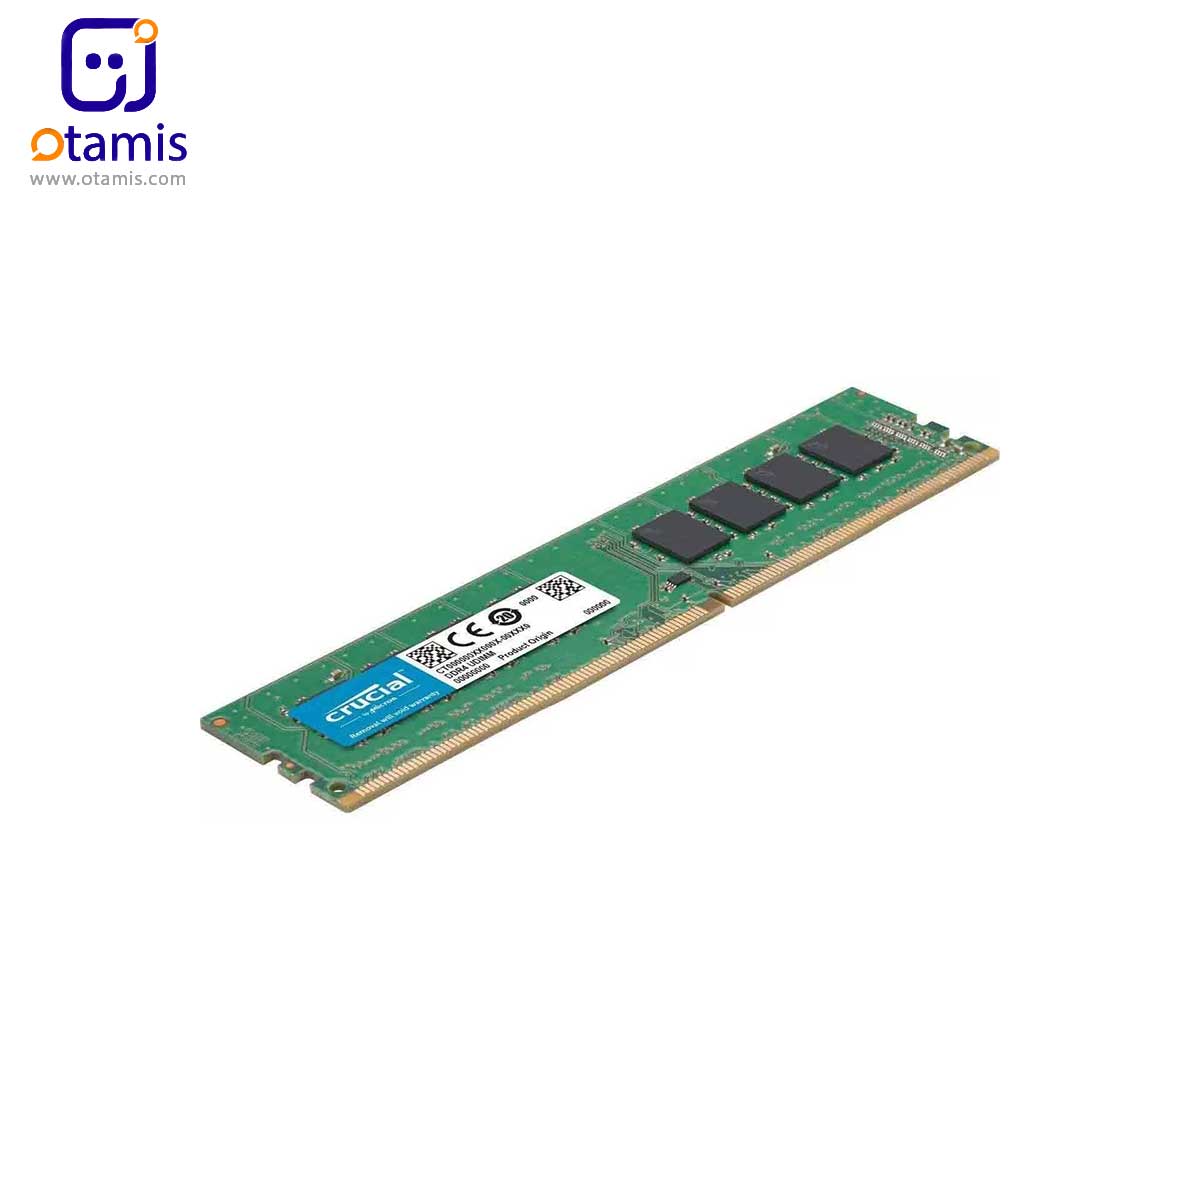 Crucial DDR4 2666MHz CL17 Single Channel computer RAM 16GB